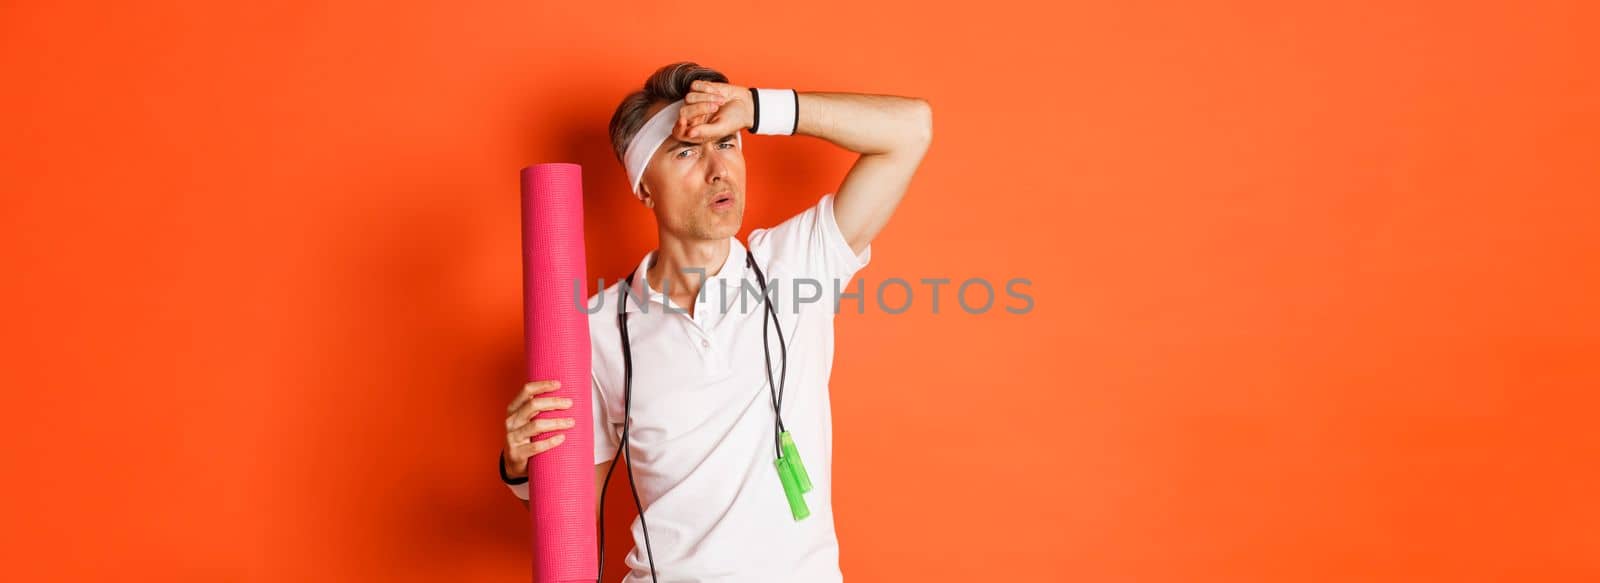 Concept of workout, gym and lifestyle. Image of handsome middle-aged man, tired after fitness exercises, holding skipping rope and yoga mat, wiping sweat off forehead, orange background.